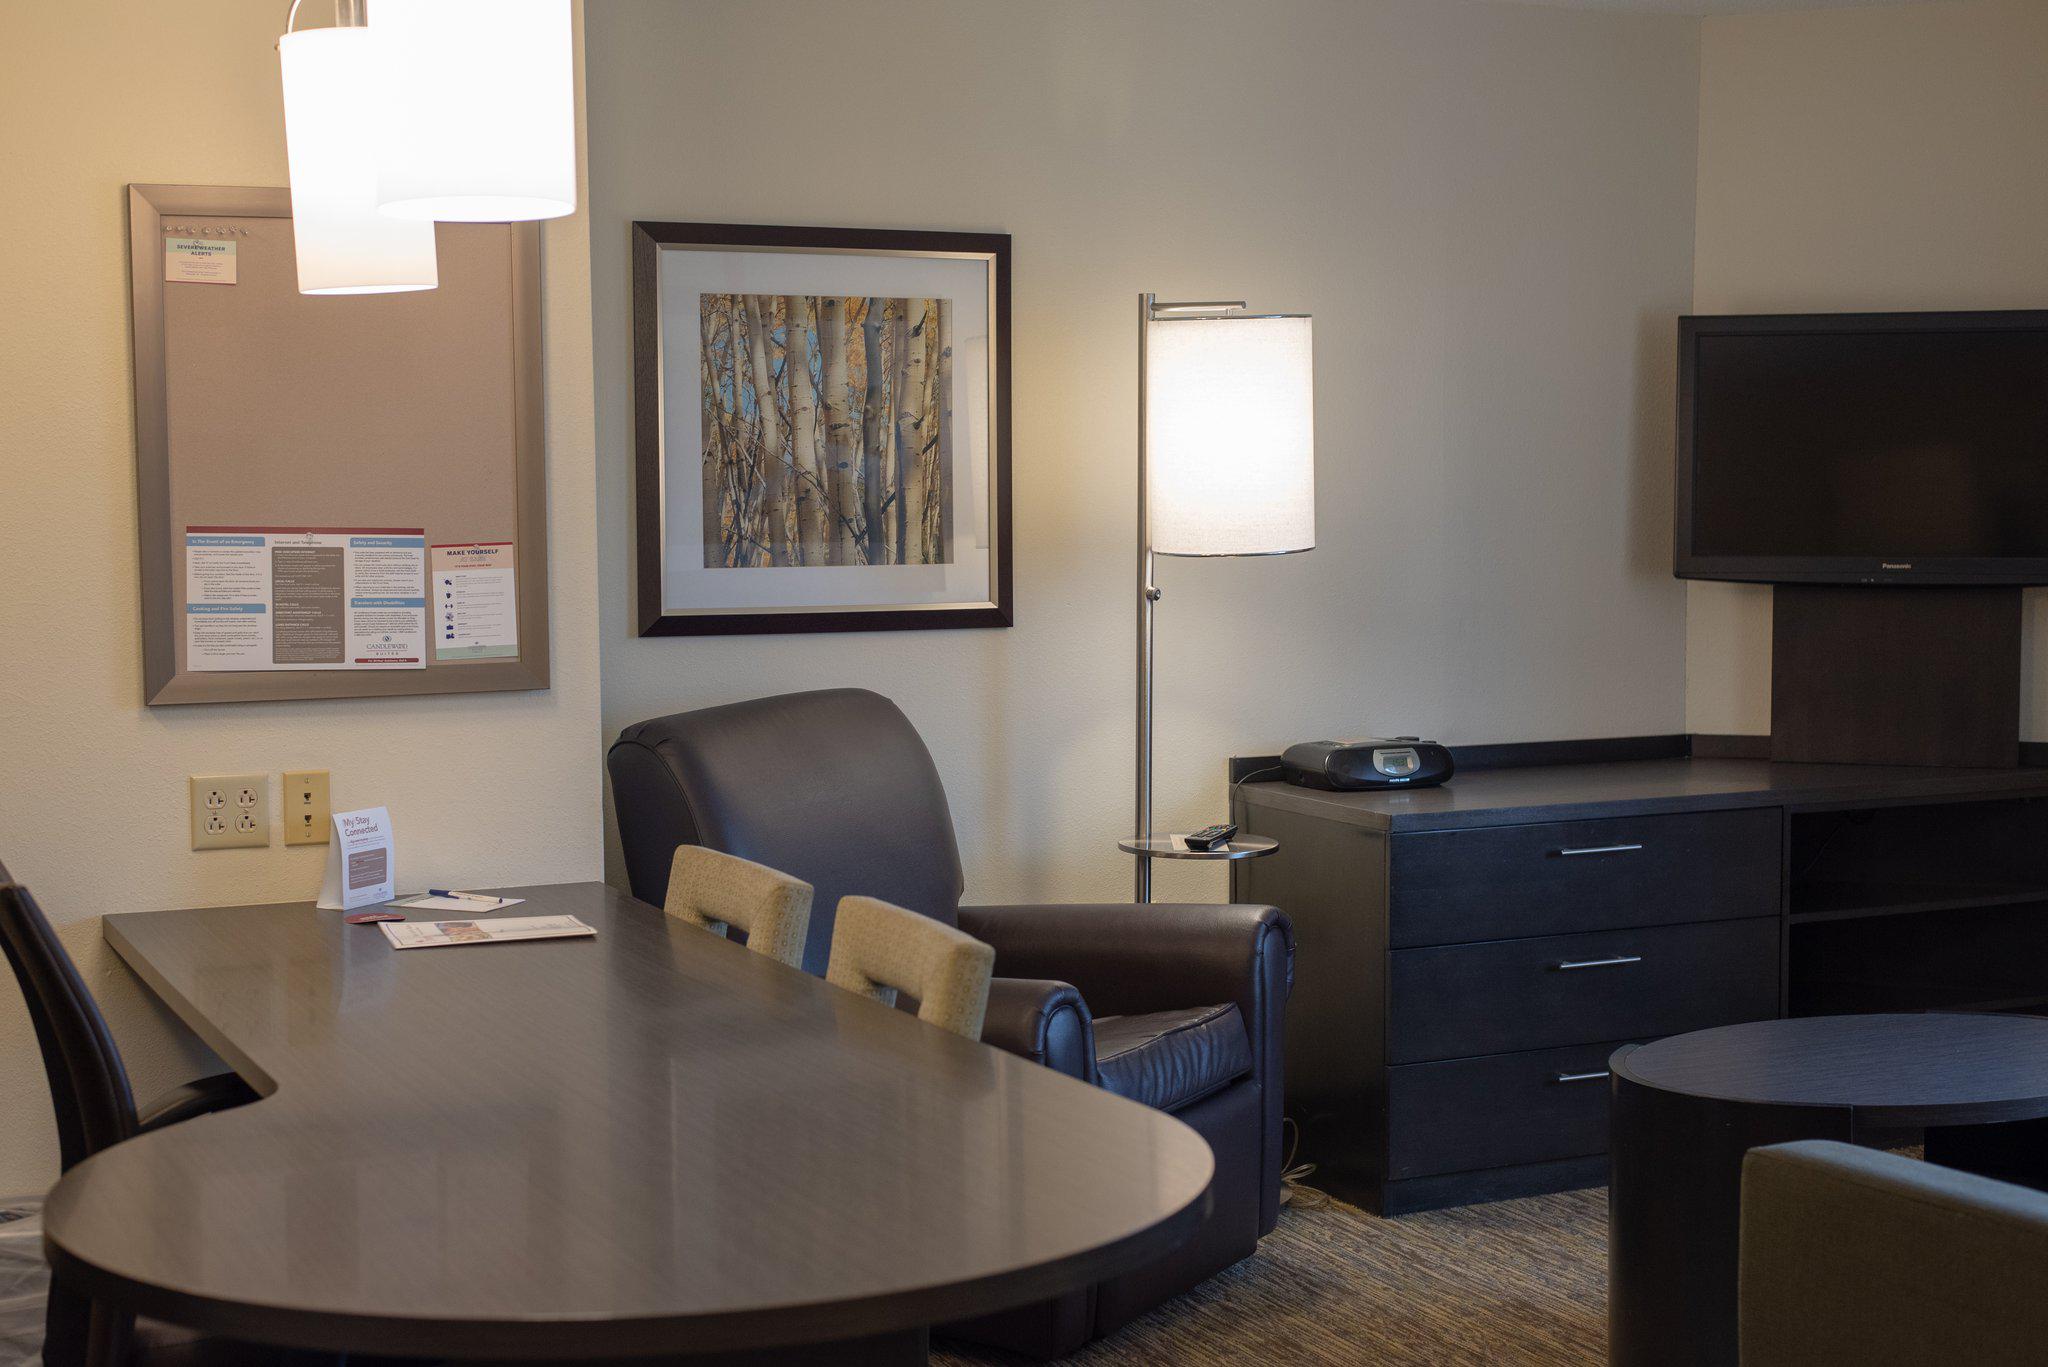 Candlewood Suites Pittsburgh-Airport Photo